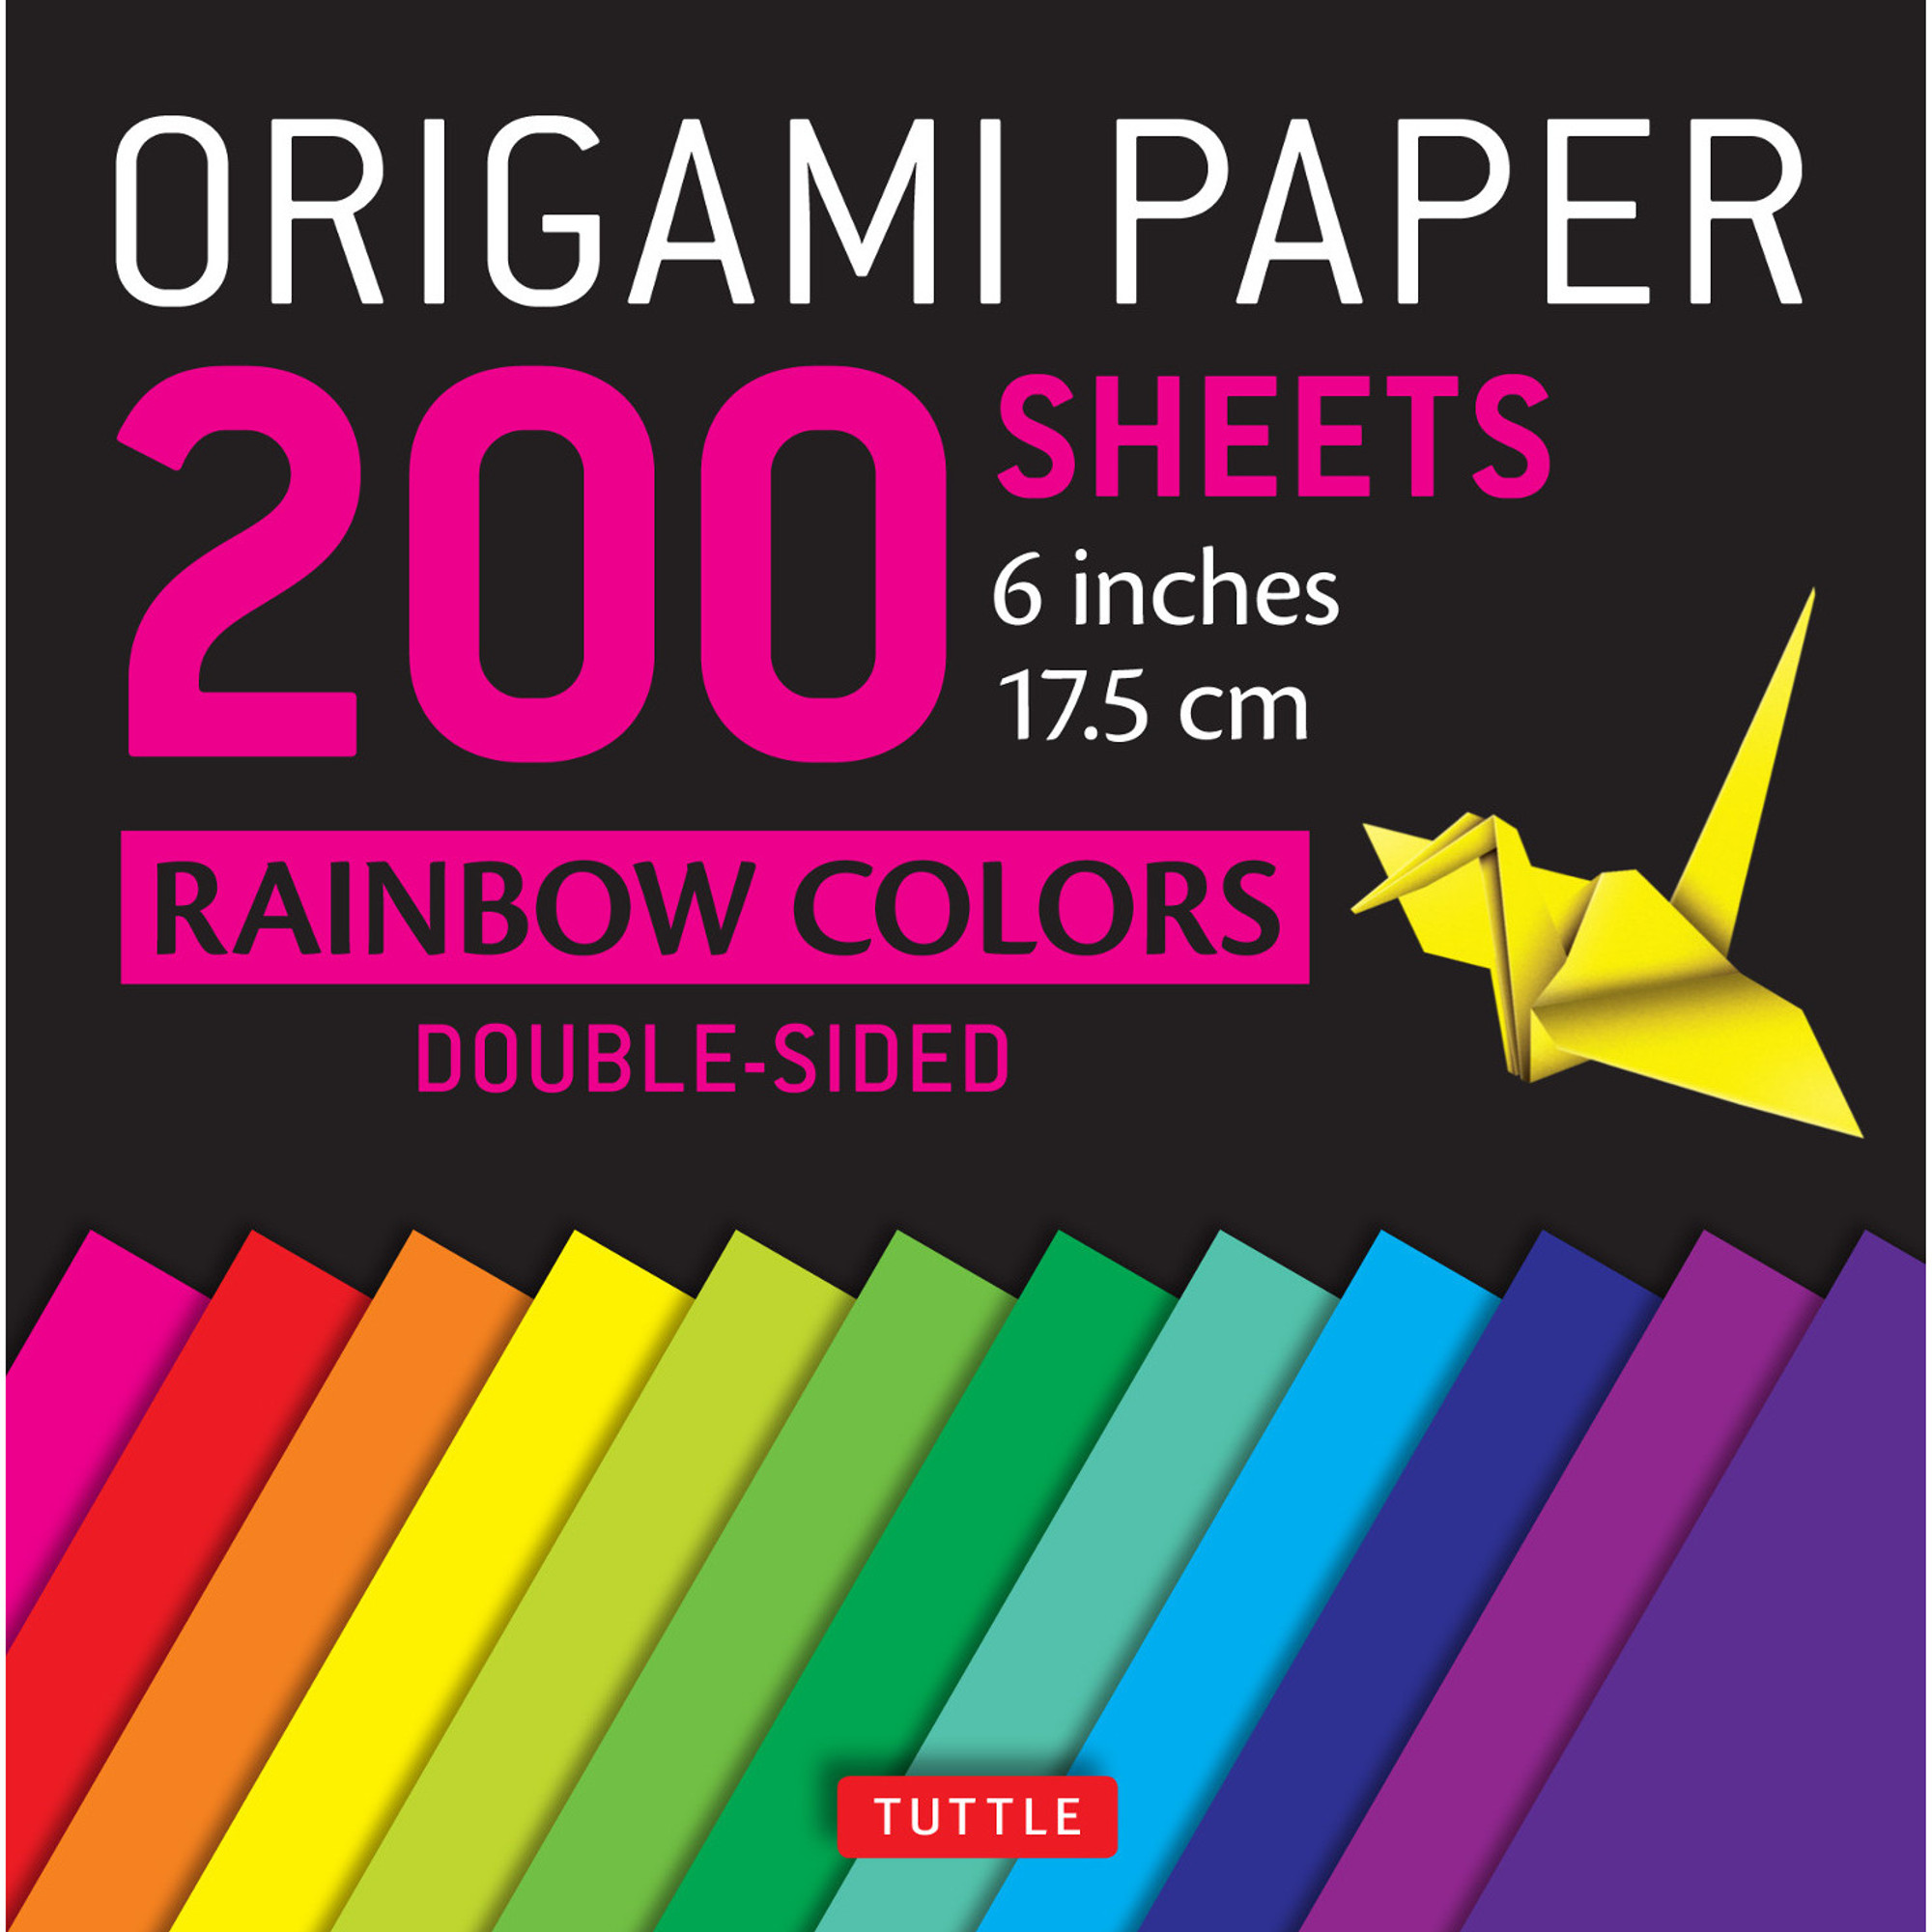 KOBBET® 15cm x 15cm Art Paper Sheet Colored Art & Craft Paper 100 Sheets  Fluorescent Color Both Sides Coloured for Origami Scrapbooking Hobby Crafts